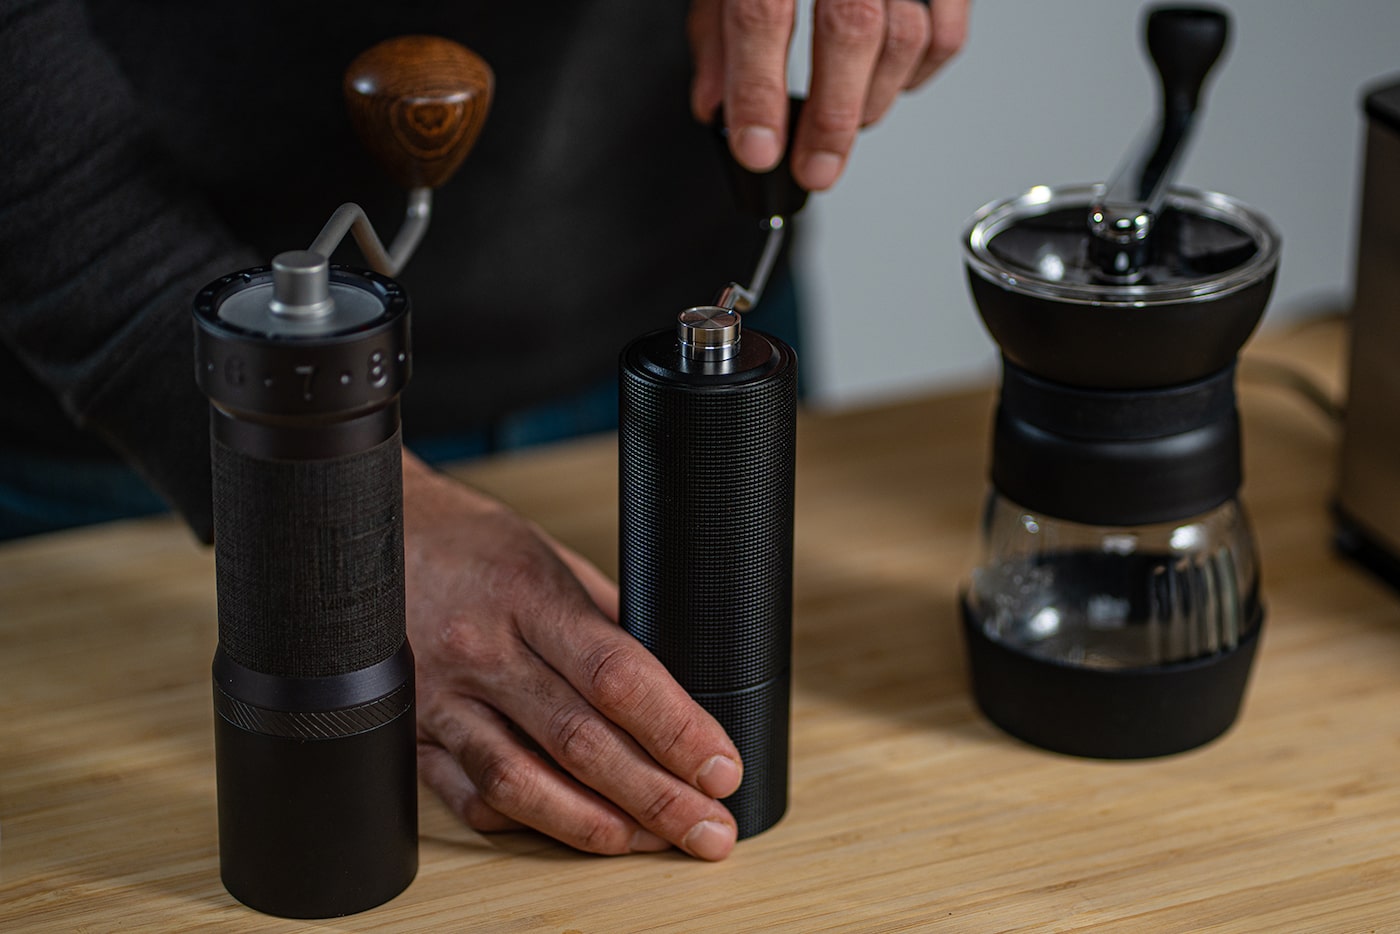 3 types of hand grinders - the 1ZPresso K-Max, the Timemore Chestnut C3, and the Hario Skerton